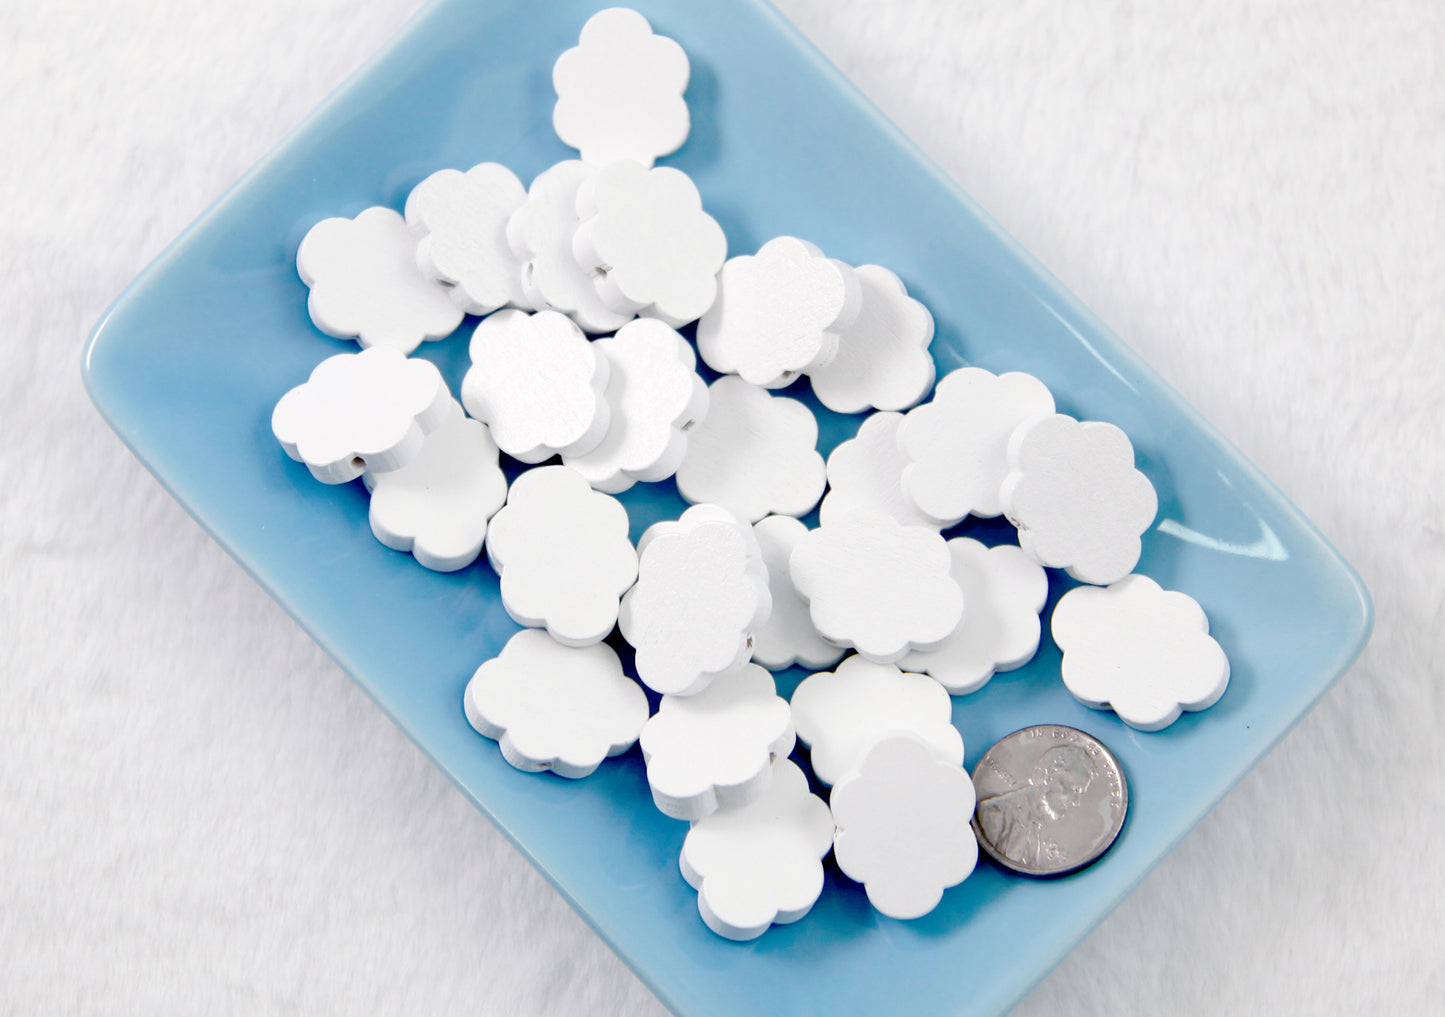 Cloud Beads - 20mm Cute White Clouds Painted Wood Beads - 35 pc set